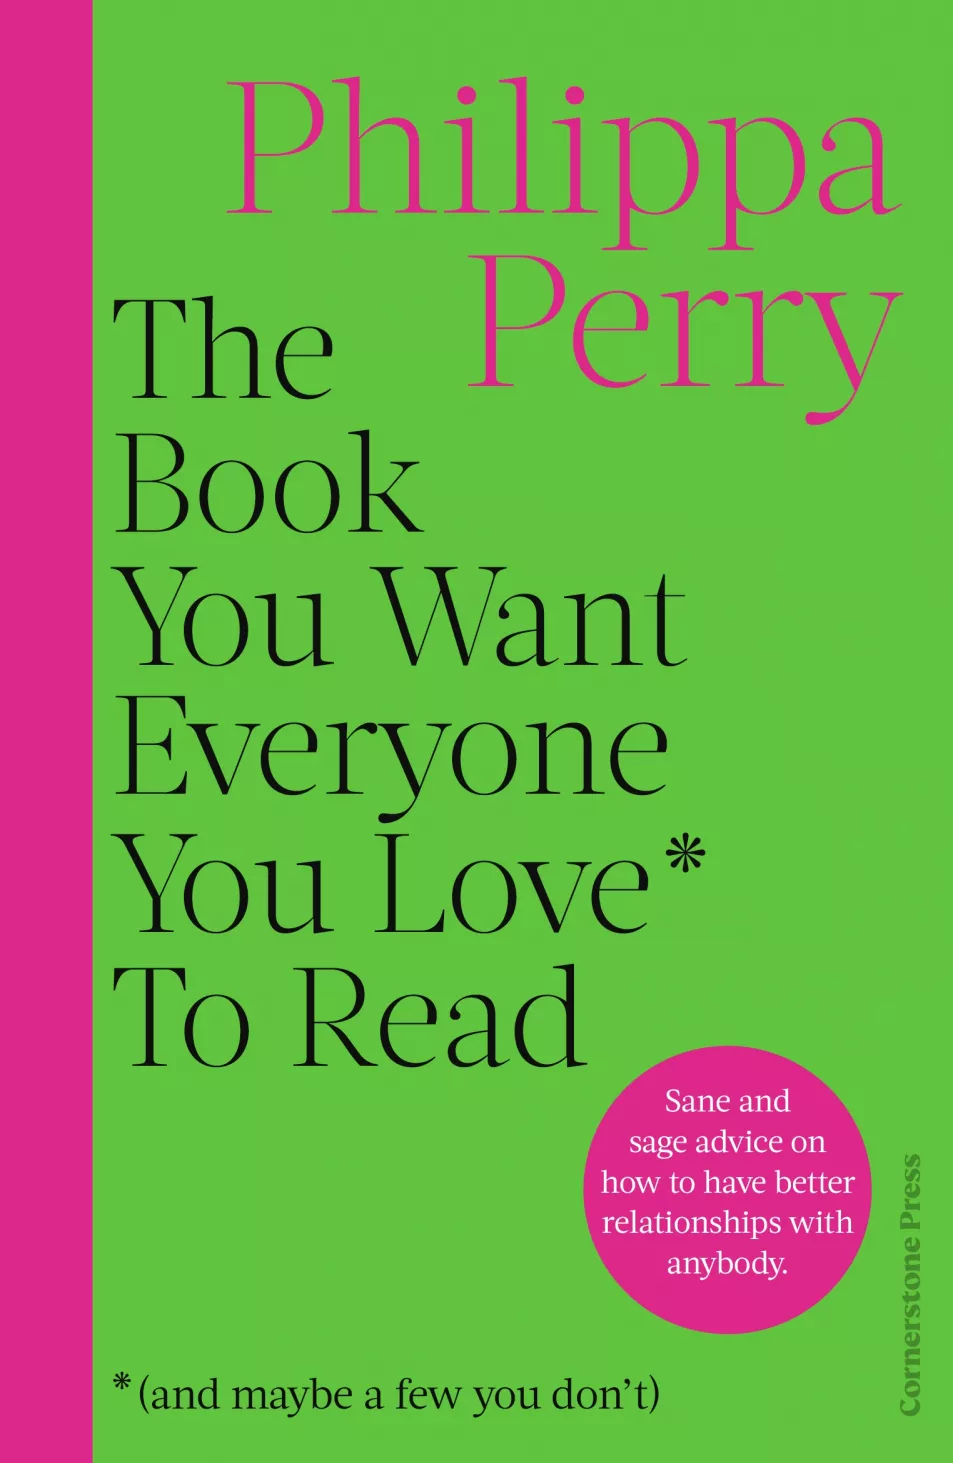 The Book You Want Everyone You Love to Read